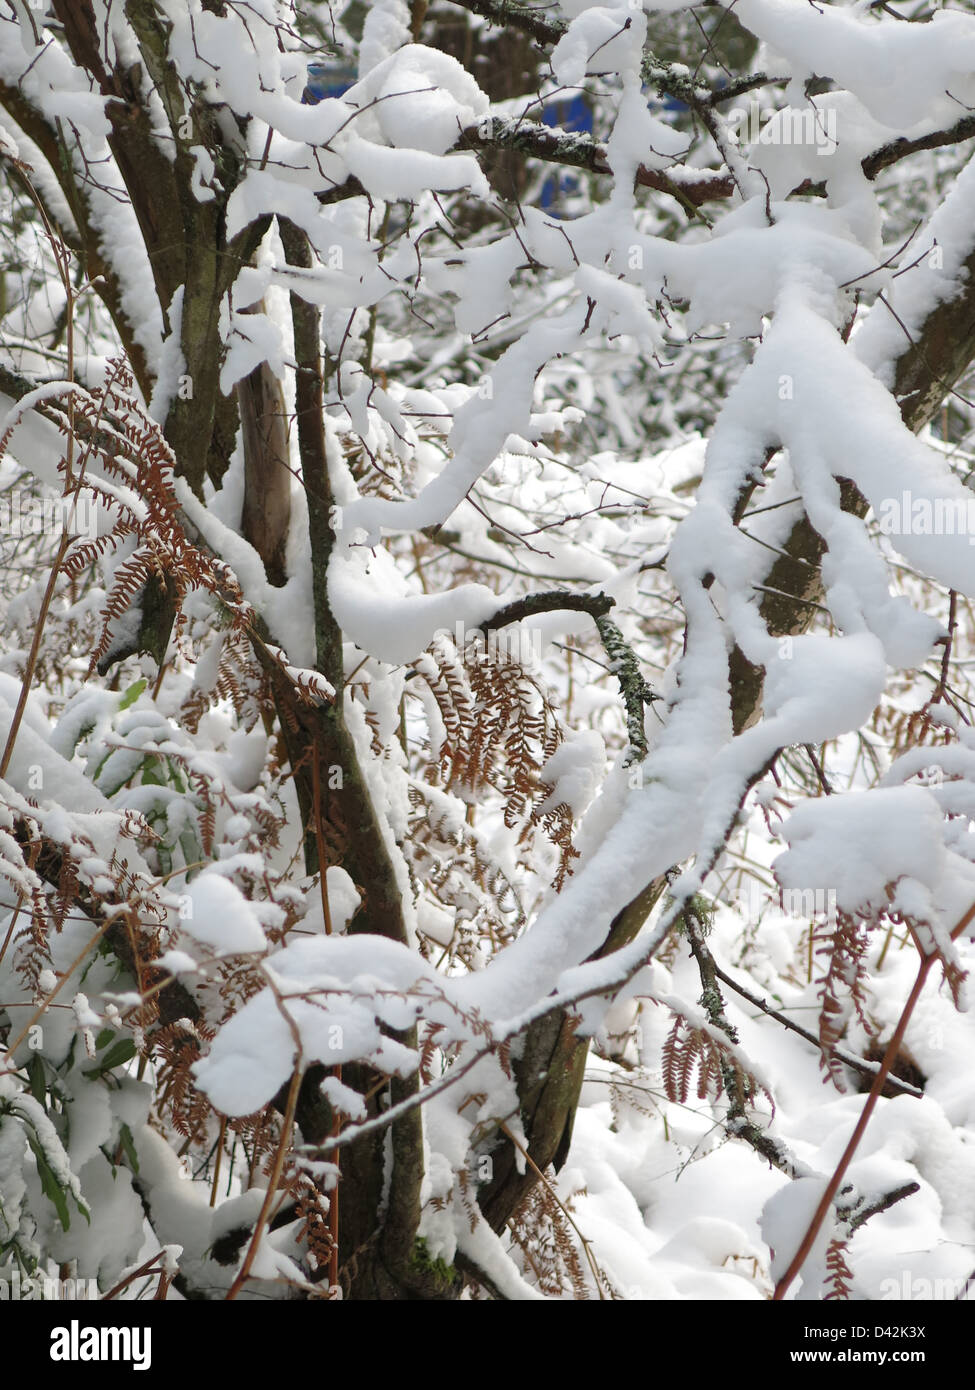 Snow Covered Ferns, Jan 2013 Stock Photo